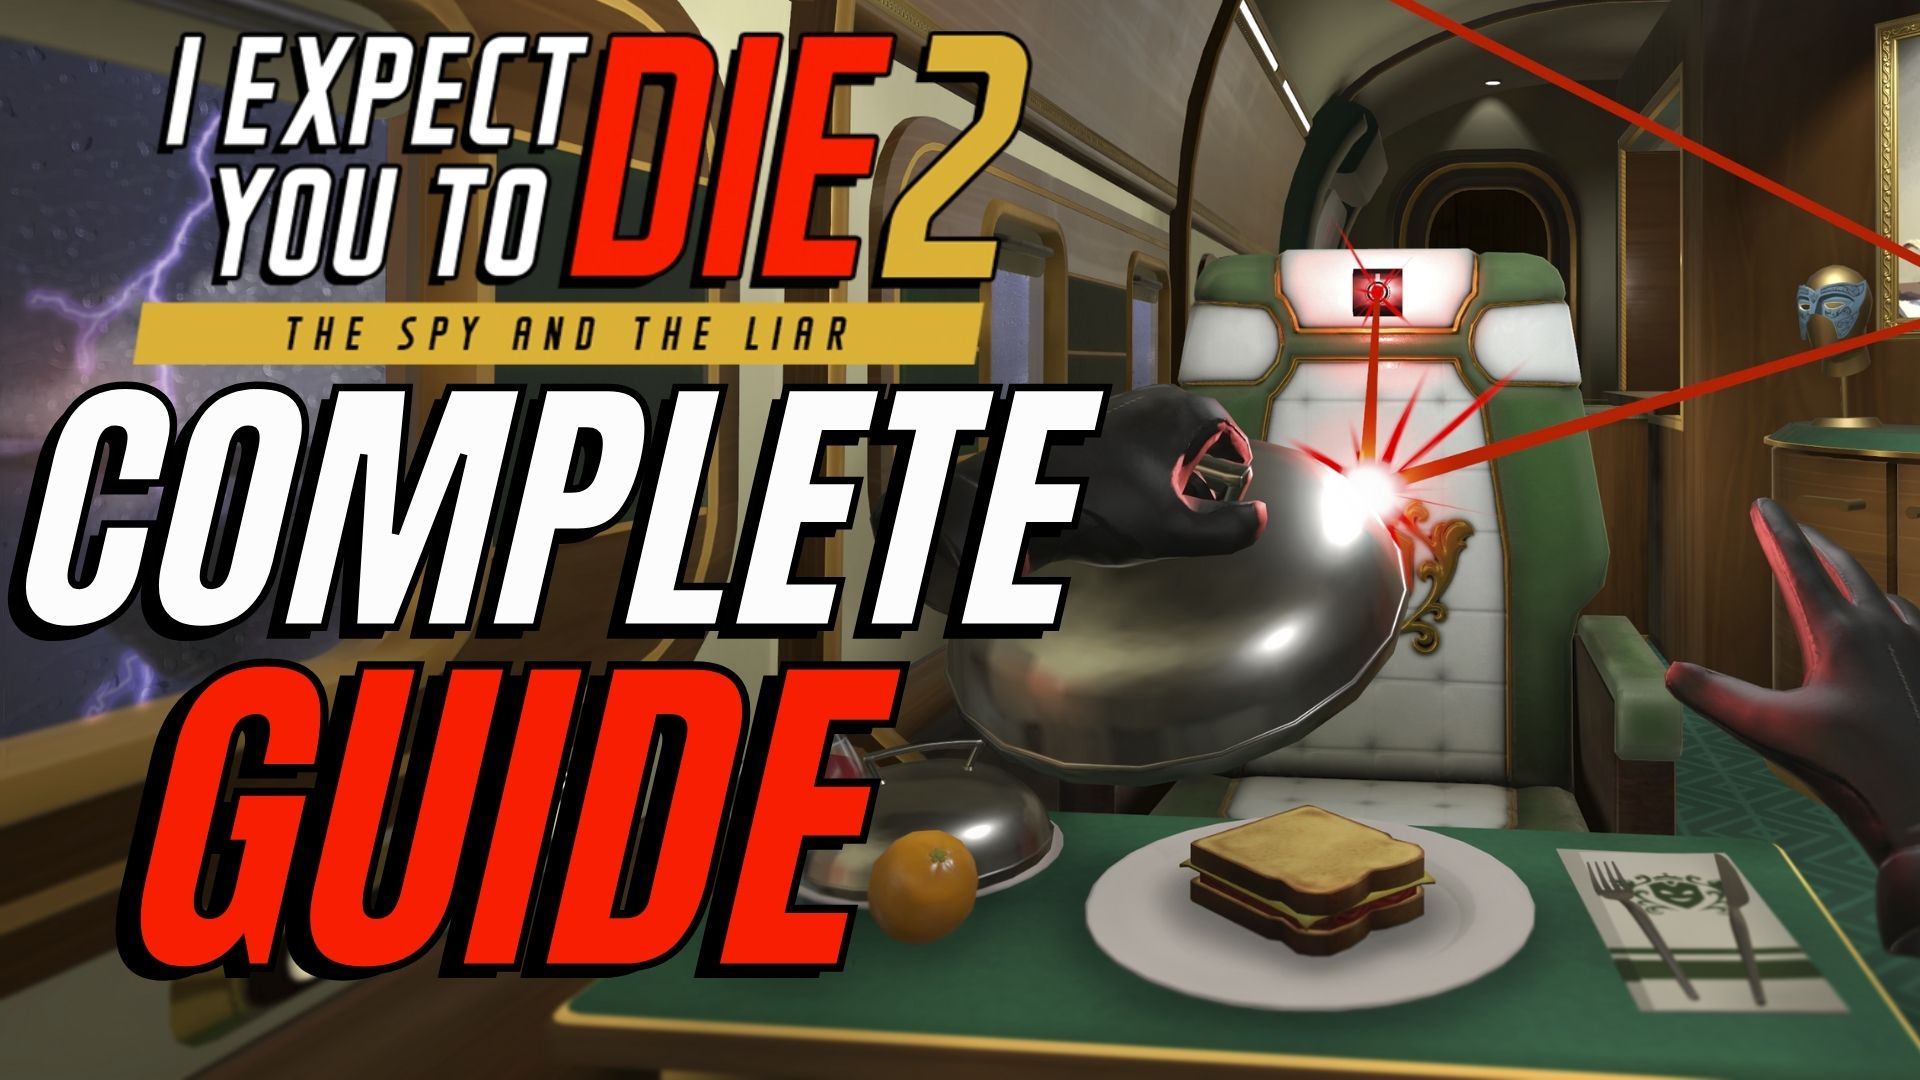 guide-i-expect-you-to-die-2-complete-walkthrough-player-assist-game-guides-walkthroughs